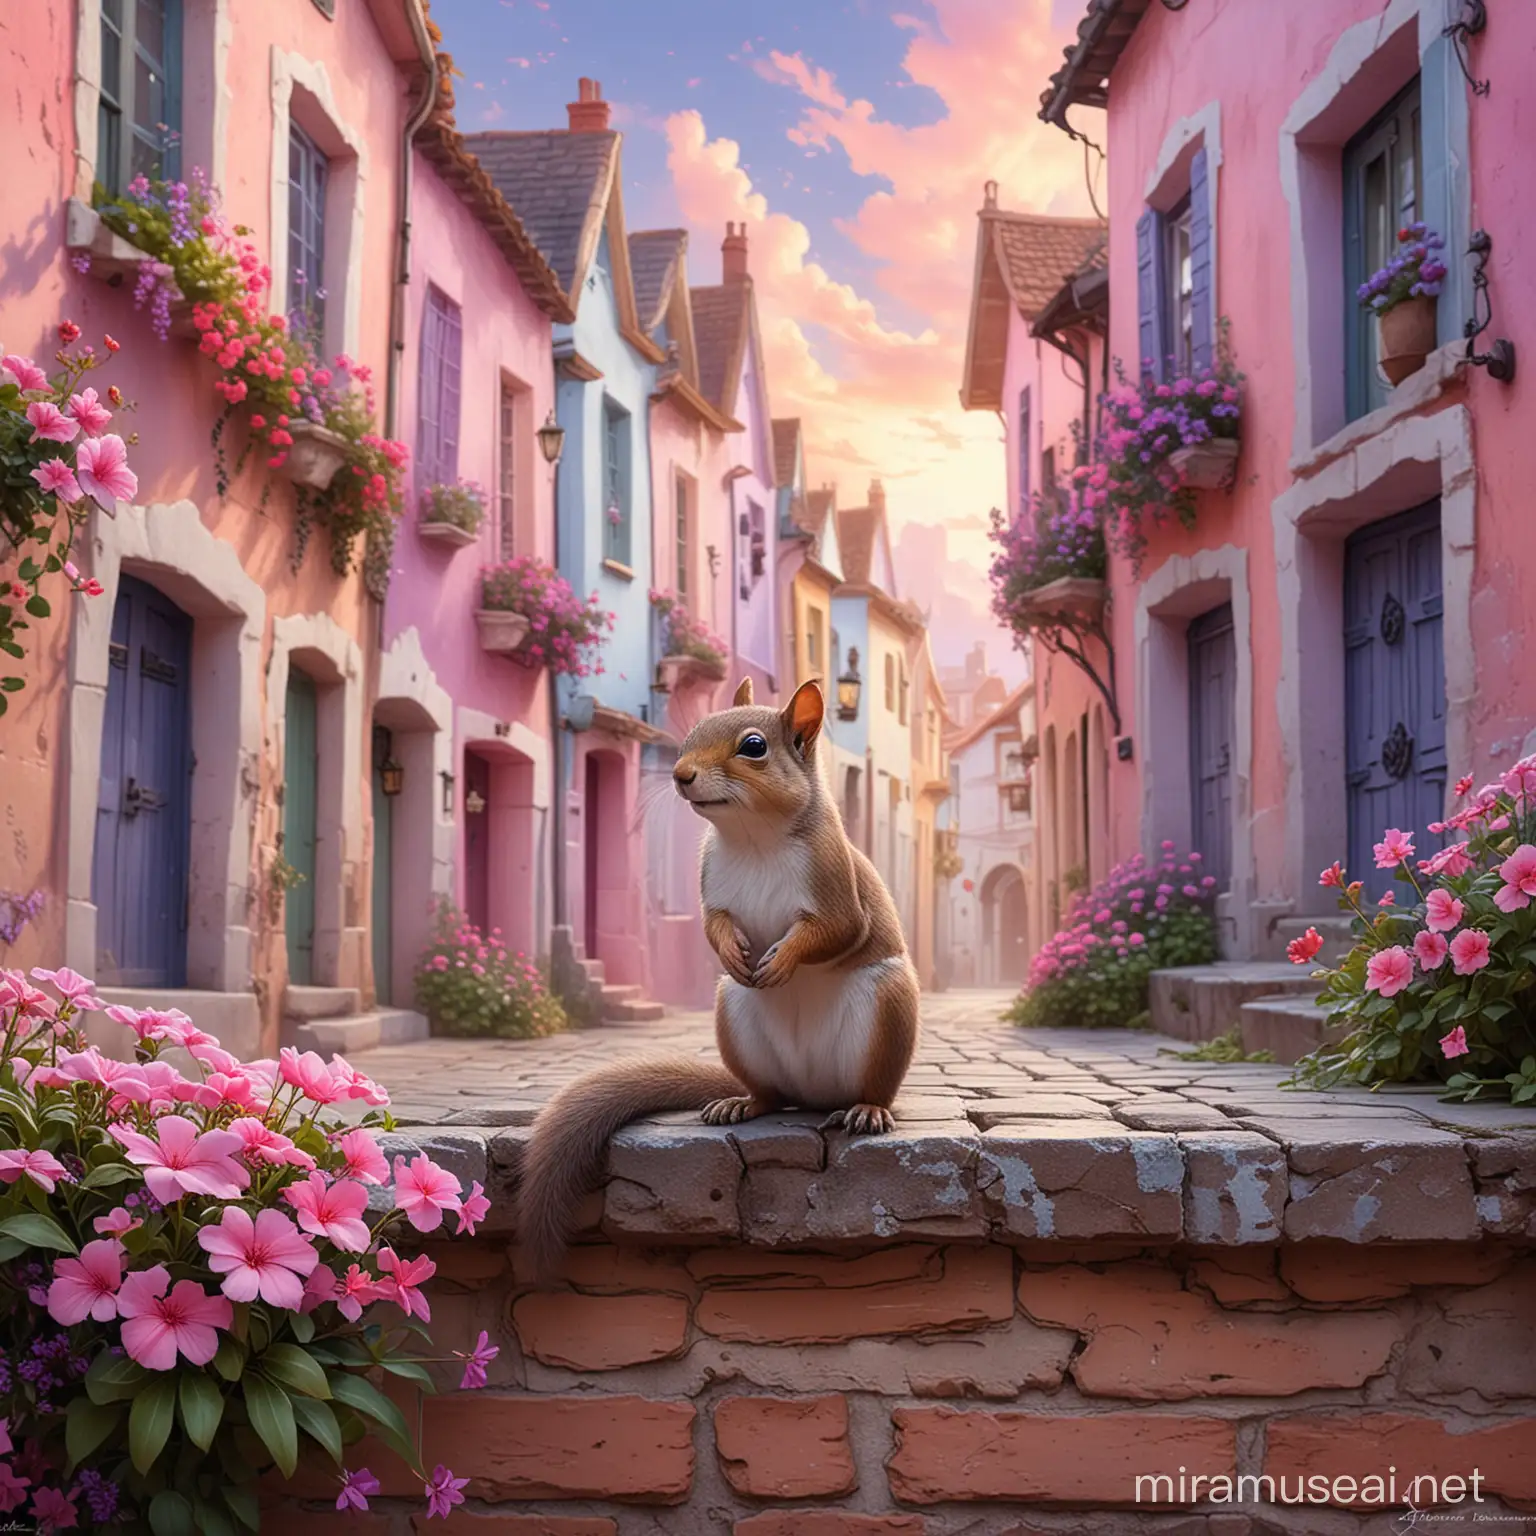 A painting of a beautiful little squirrel in the middle of an old street with pastel colored houses, pink and purple flowers and plants on its walls, pink clouds above its head, a cute painting in the style of Anne Stokes, fantasy art style., vibrant, painting